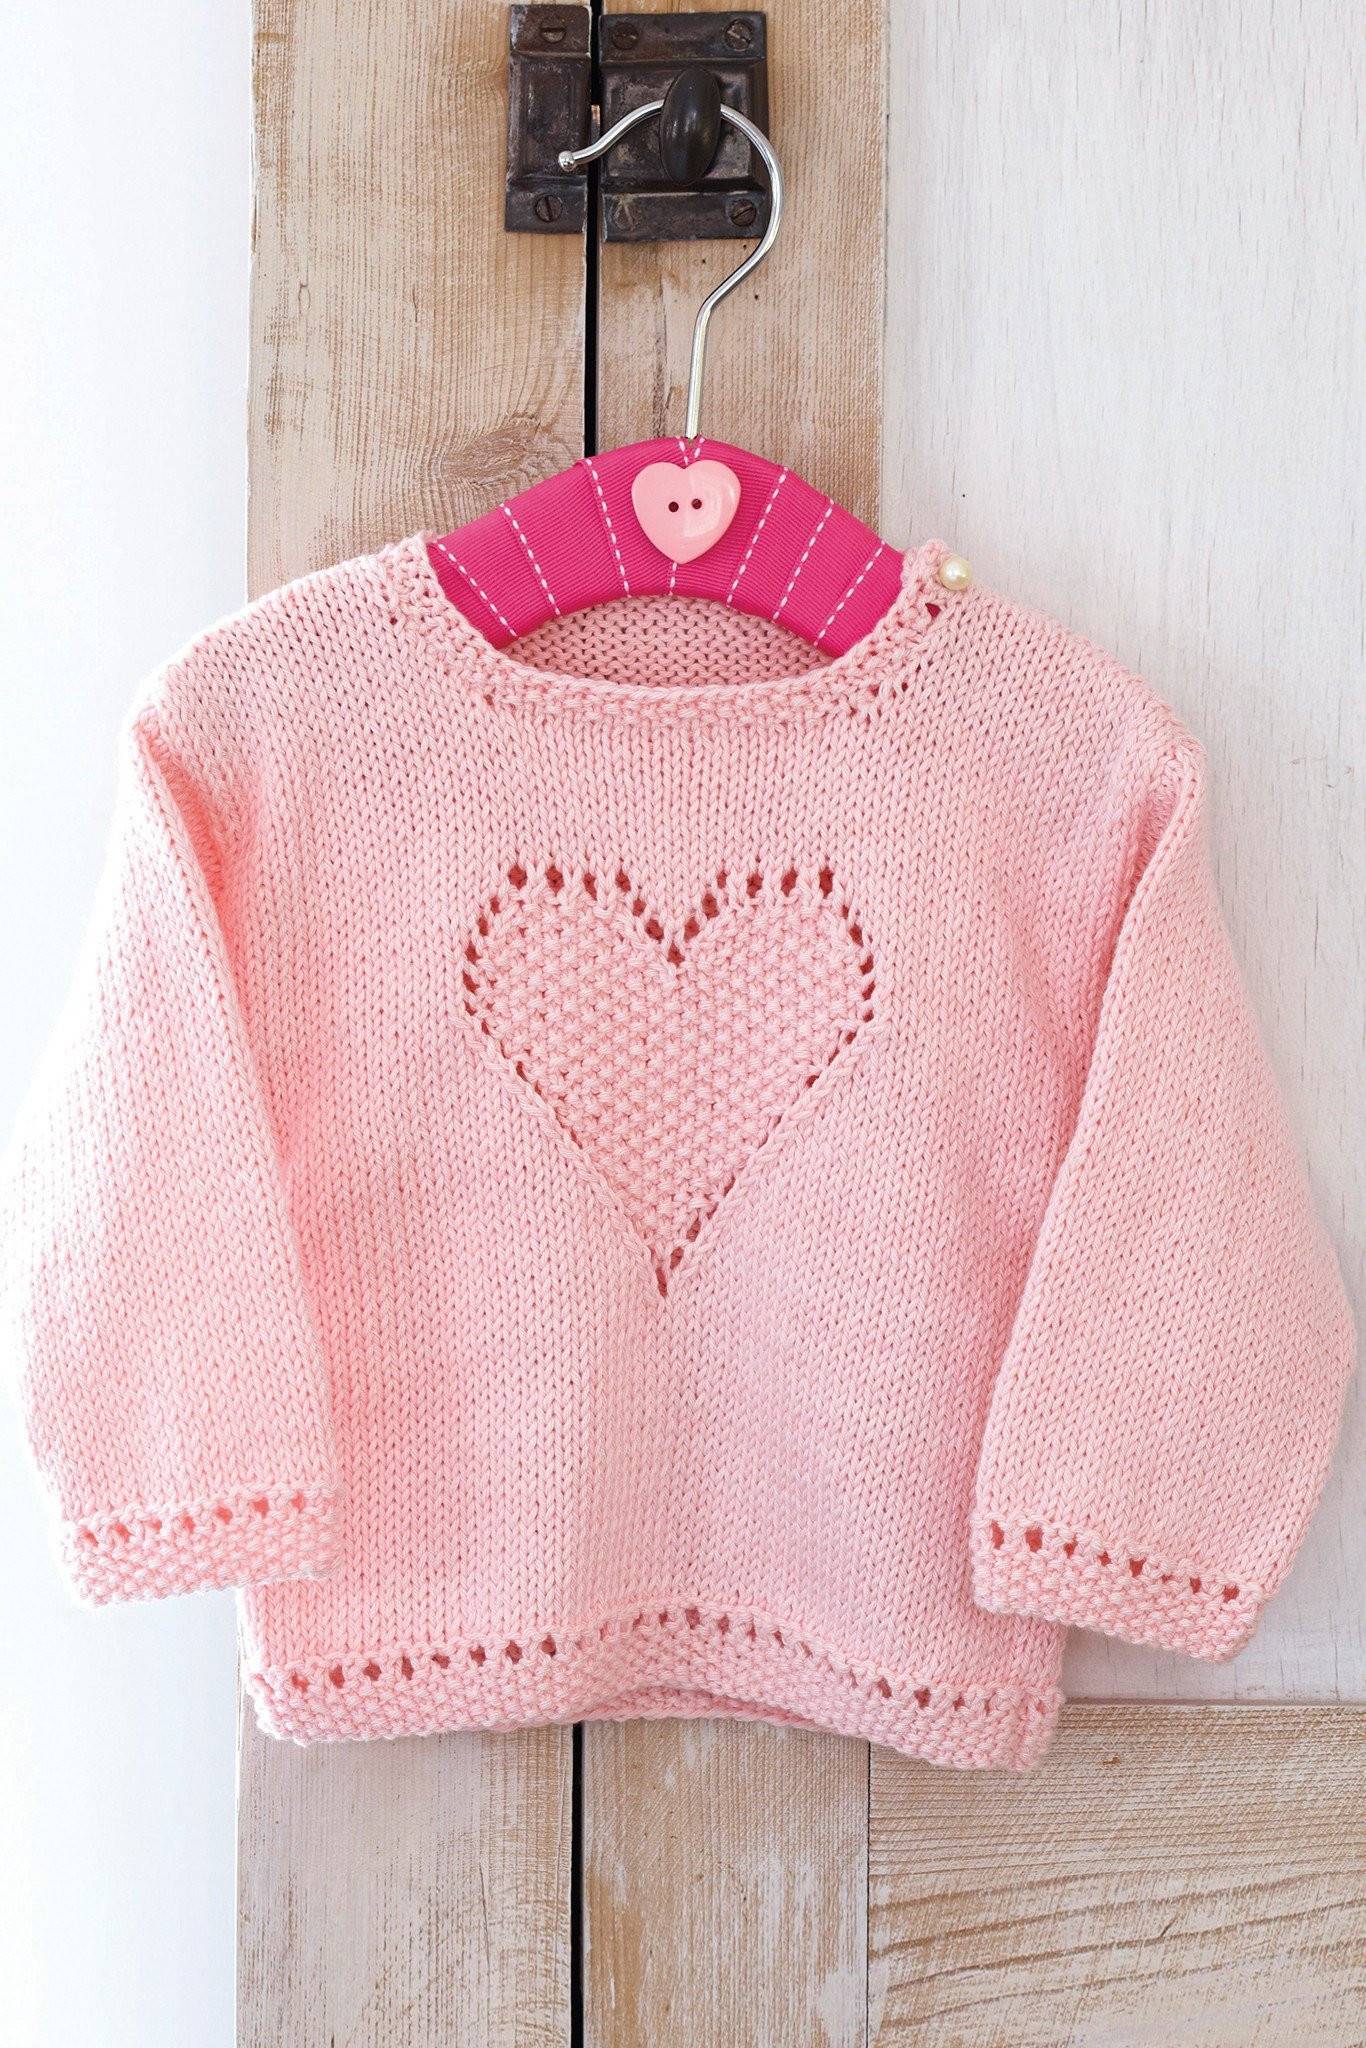 Baby Girls Jumper With Heart Knitting Pattern The Knitting Network